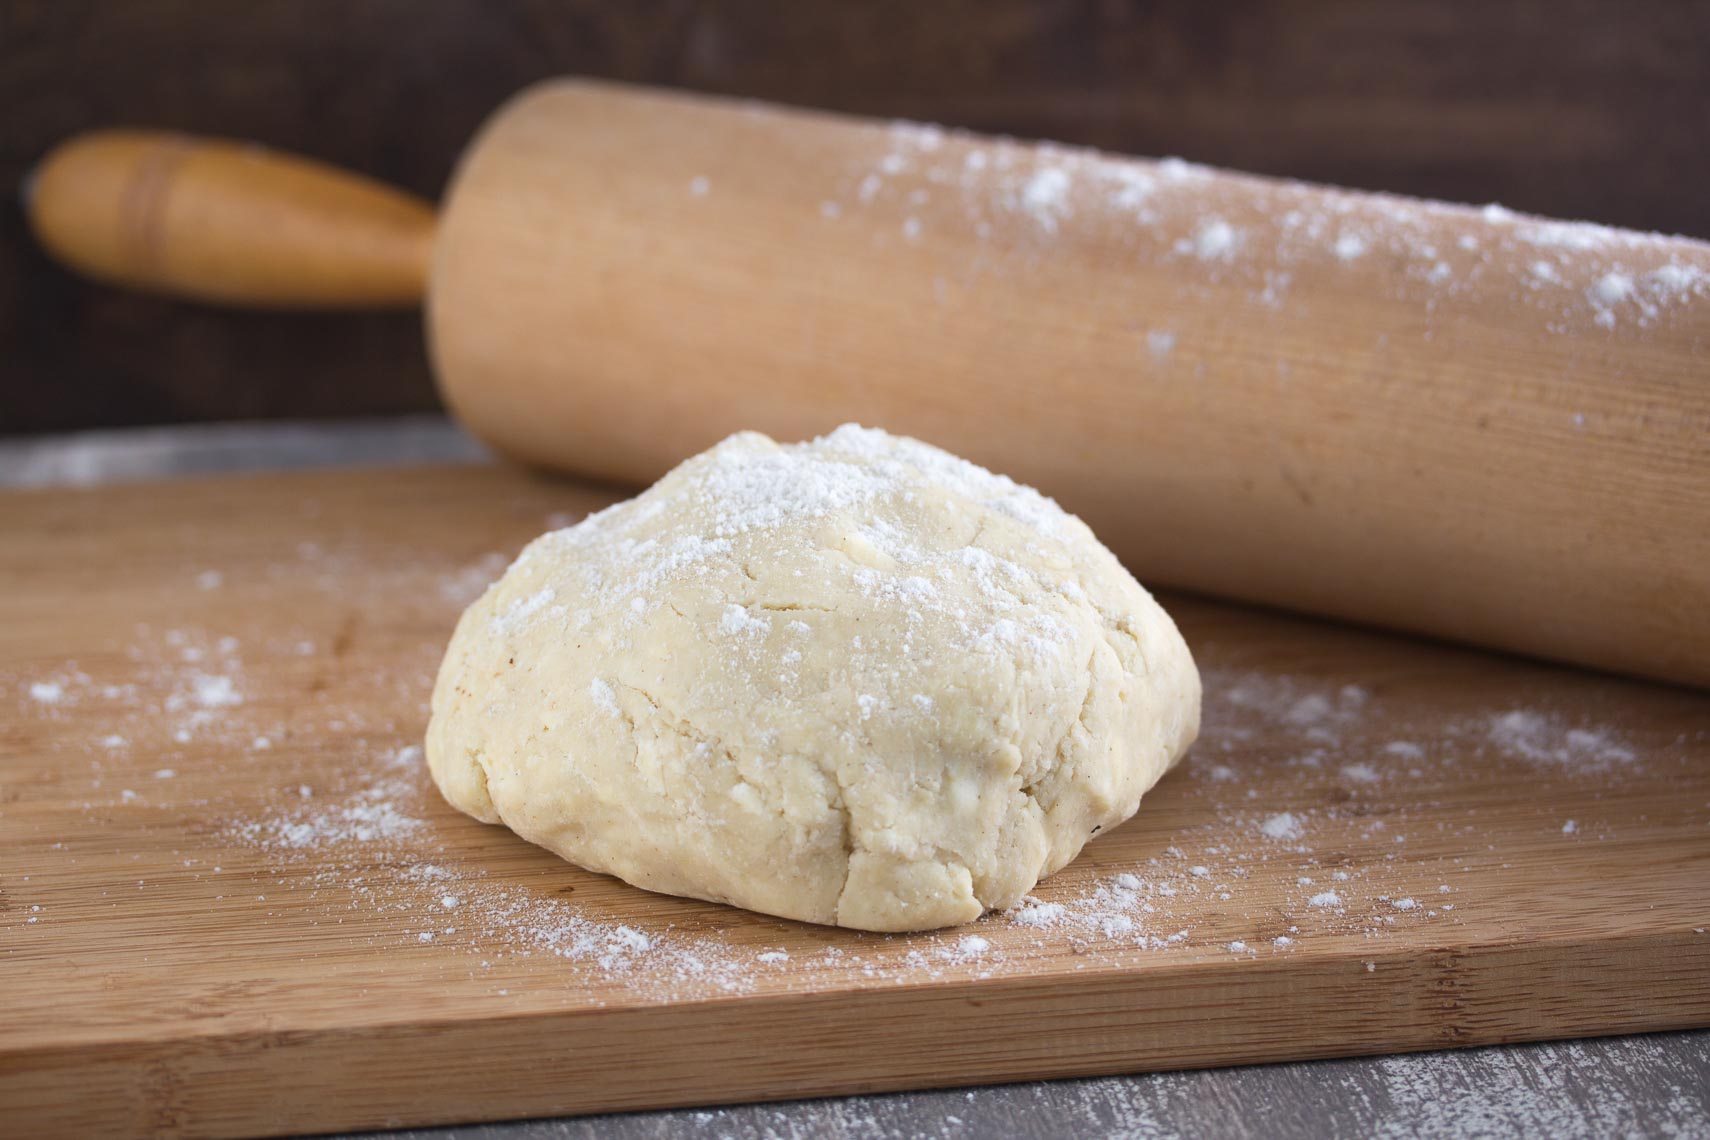 Baking Basic 101 Series: Is Your Oven Lying to You? Test to Find Out